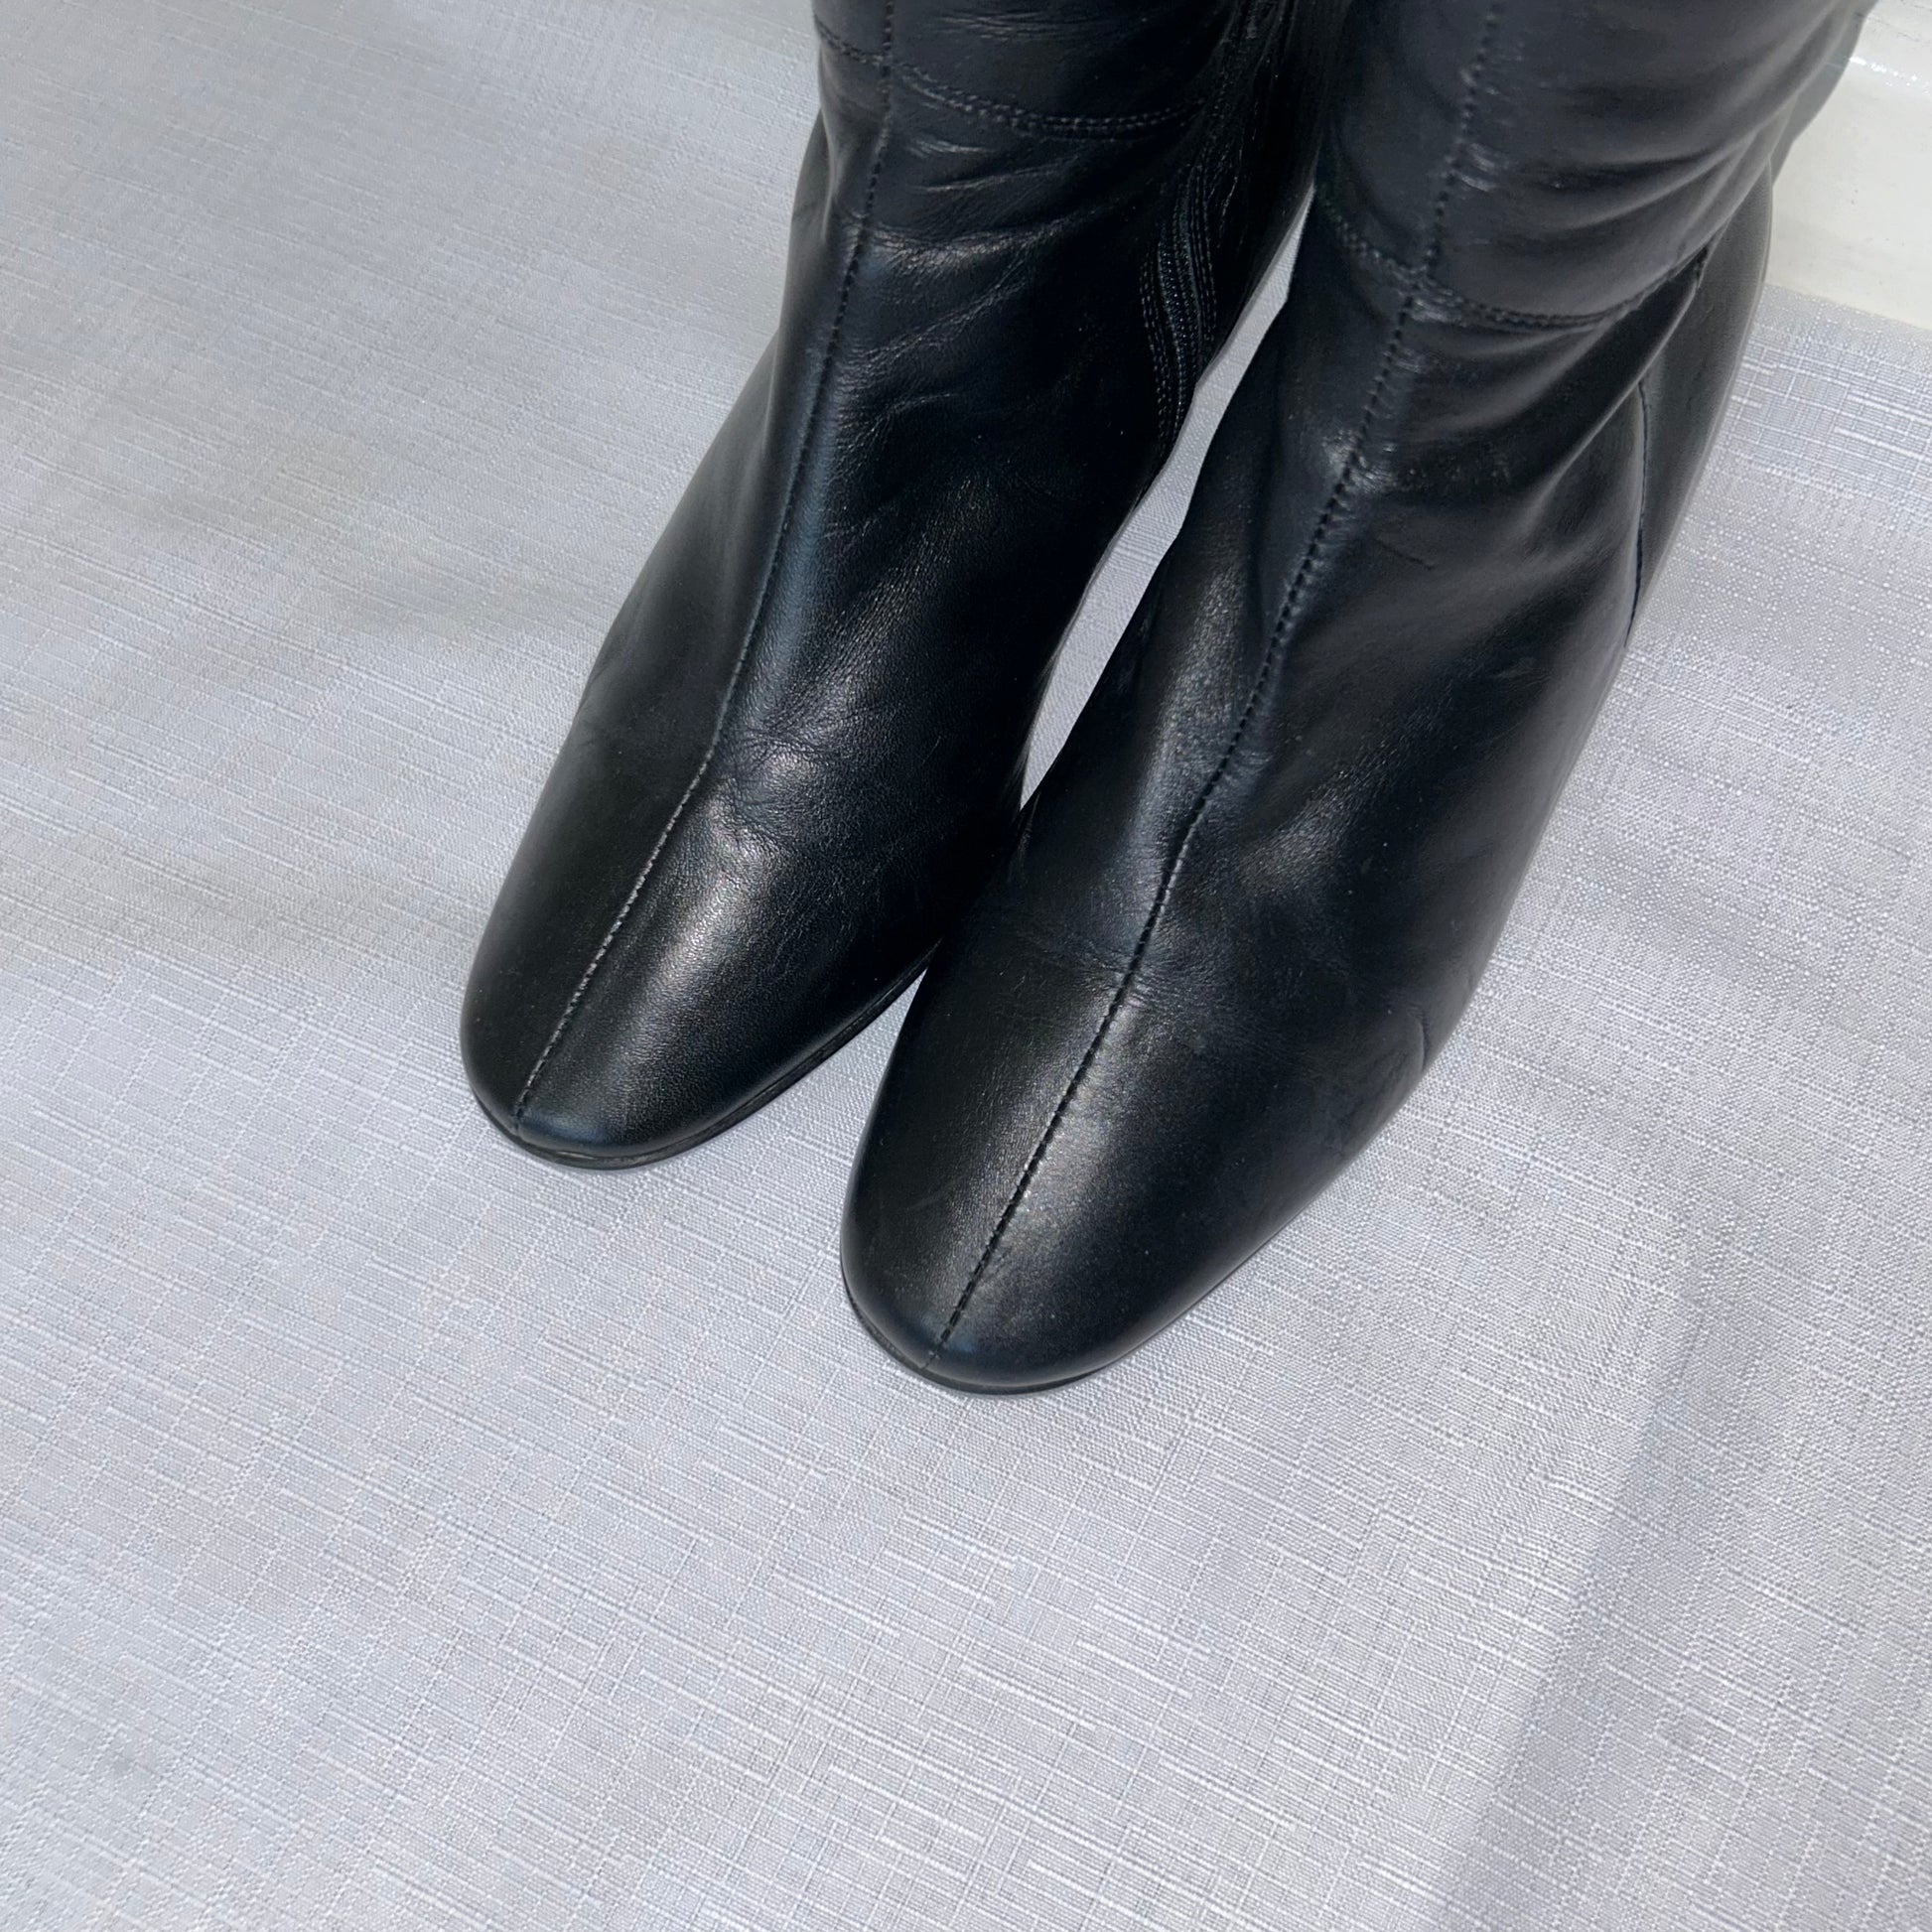 toes of black knee high kitten heel leather boots shown on a white background